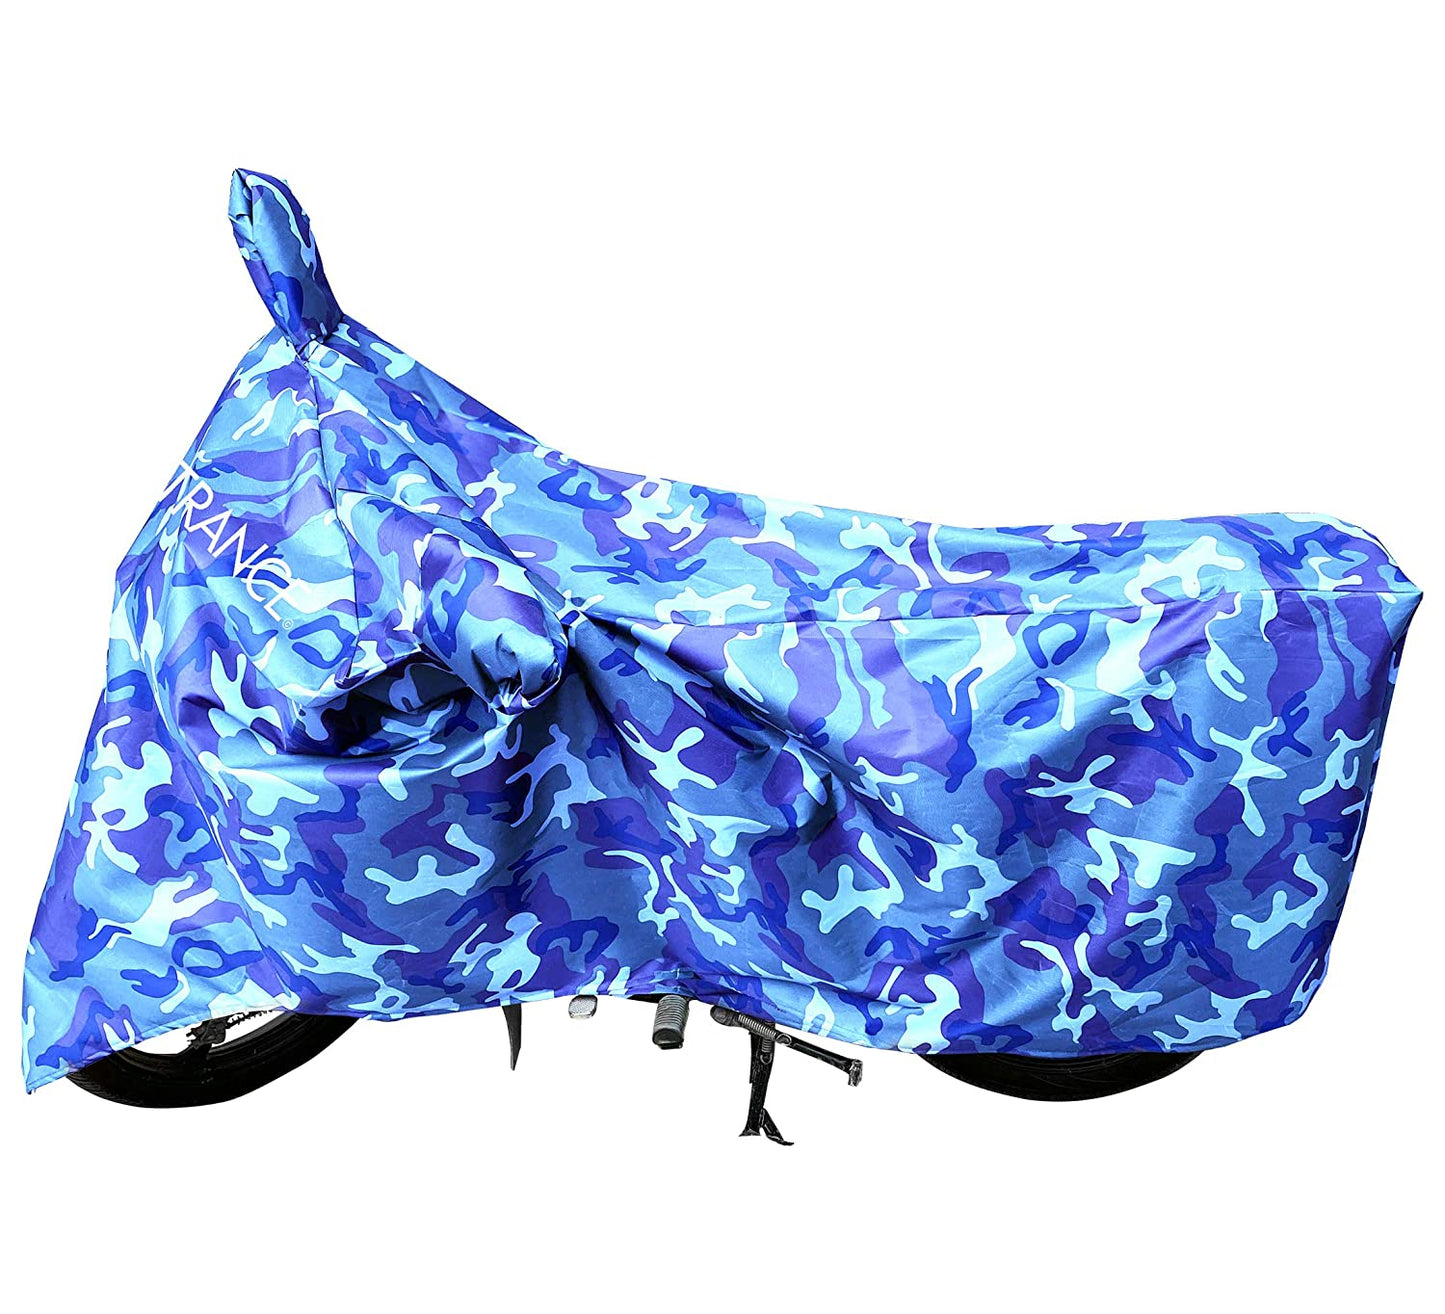 MotoTrance Jungle Bike Body Covers For Royal Enfield Thunderbird - Interlock-Stitched Waterproof and Heat Resistant with Mirror Pockets